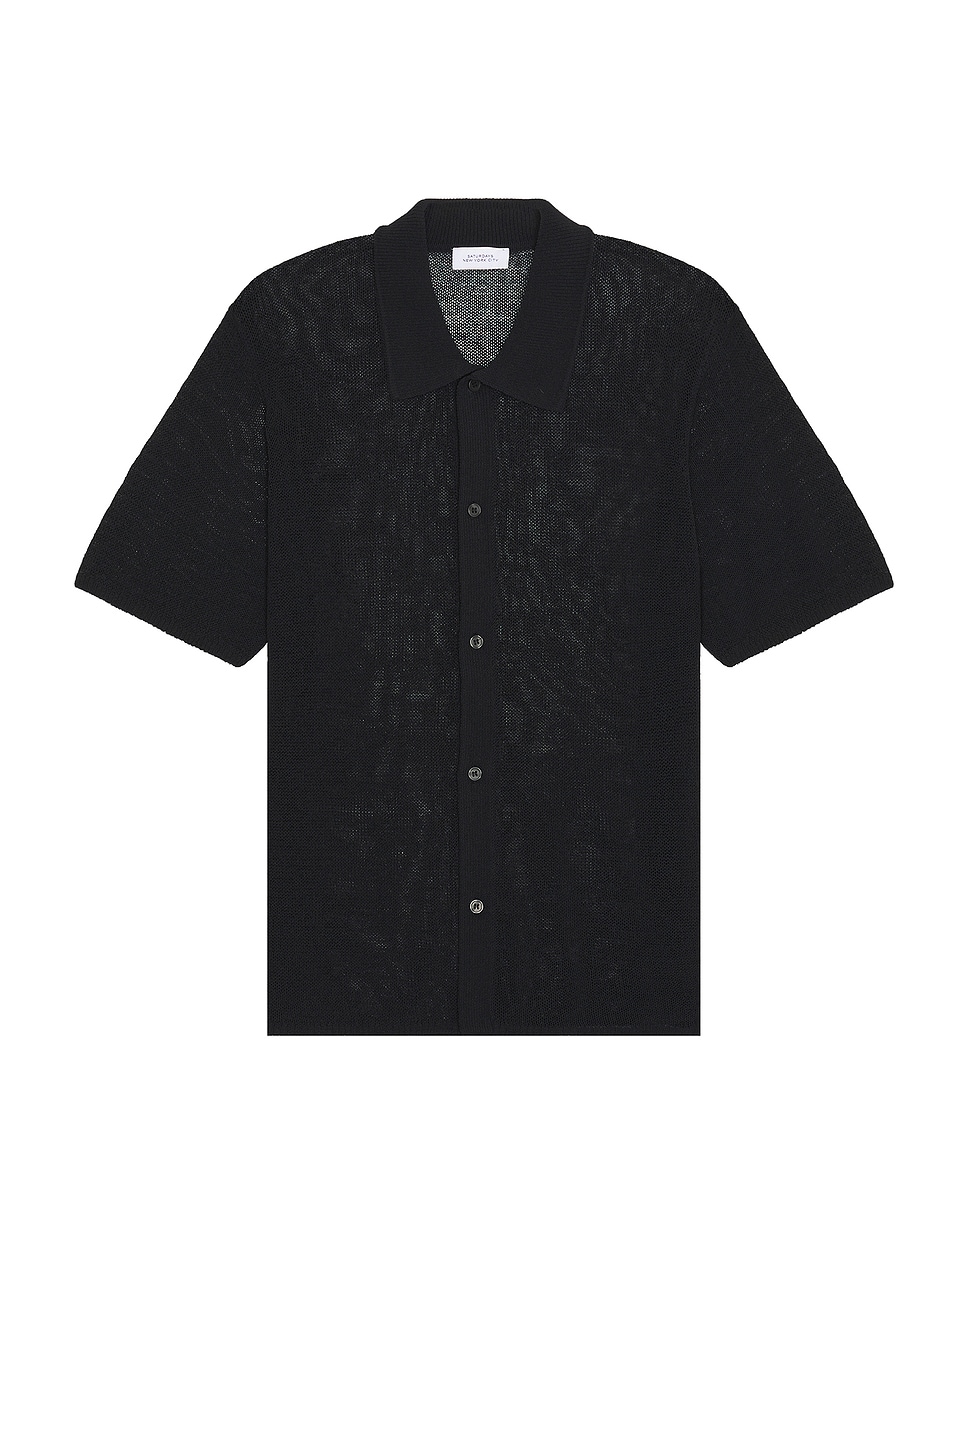 Image 1 of SATURDAYS NYC Kenneth Mesh Knit Shirt in Black